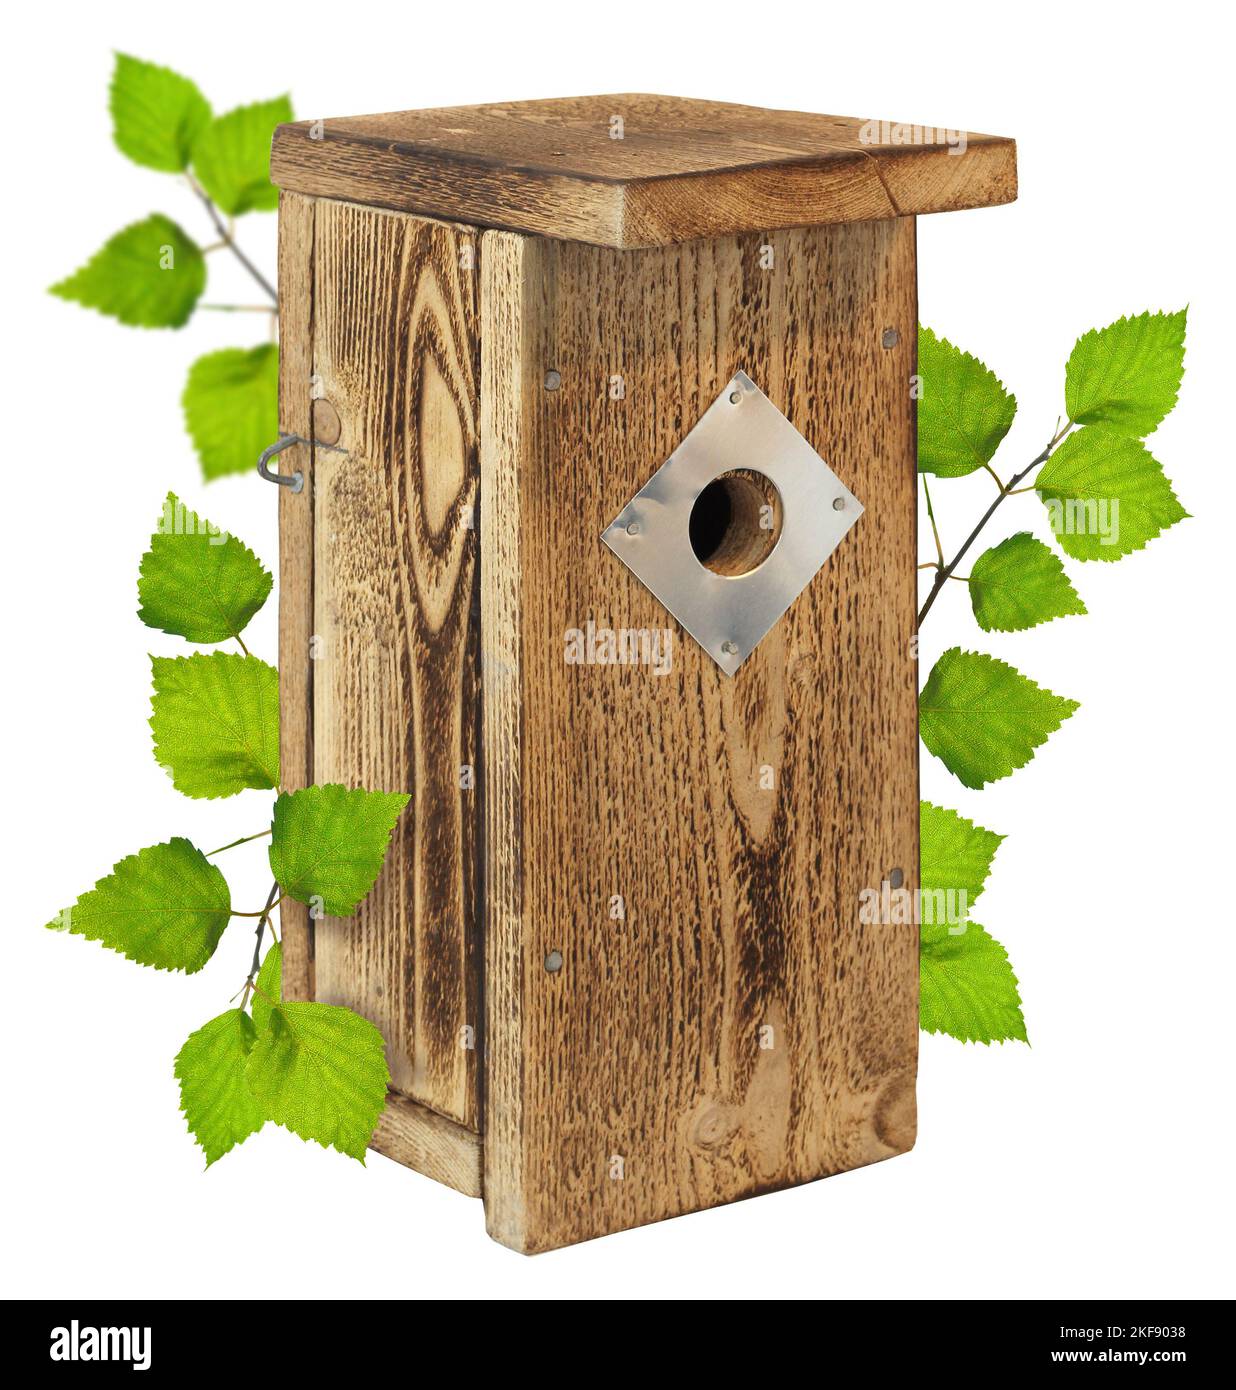 Wooden birdhouse self-made nesting box with green birch tree leaves, spring time concept, isolated Stock Photo